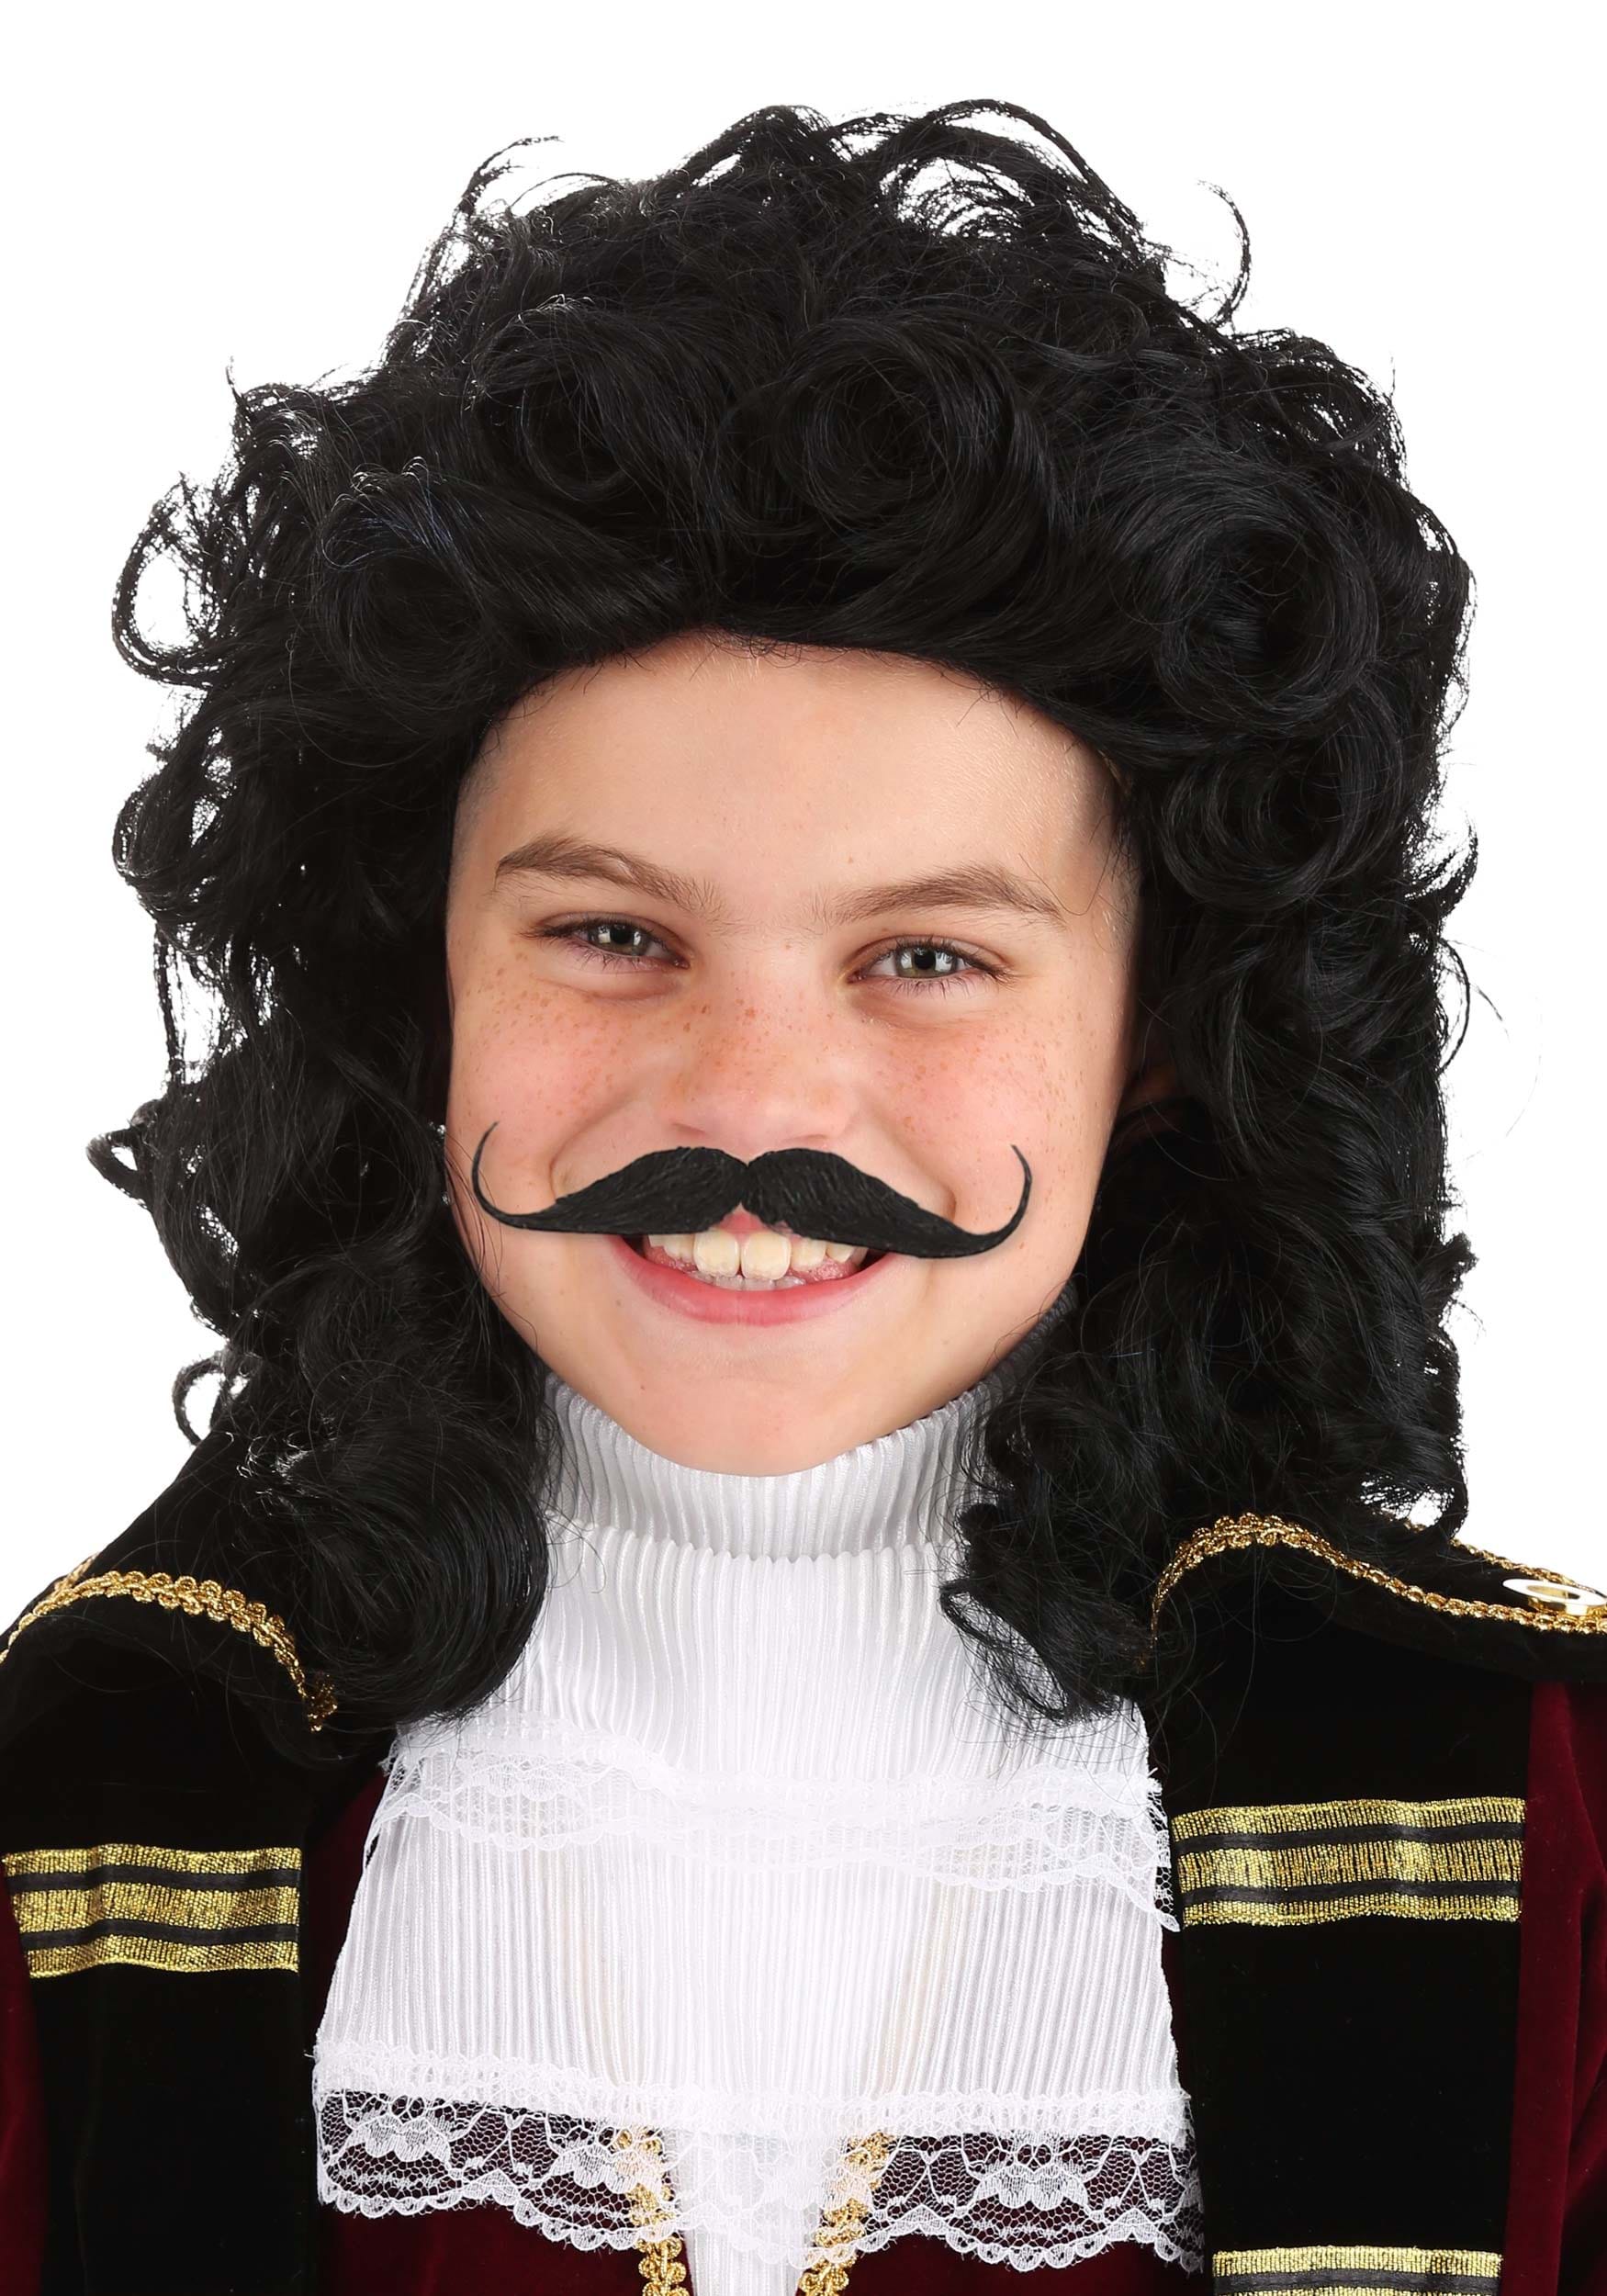 Kid’s Short Curly Pirate Wig